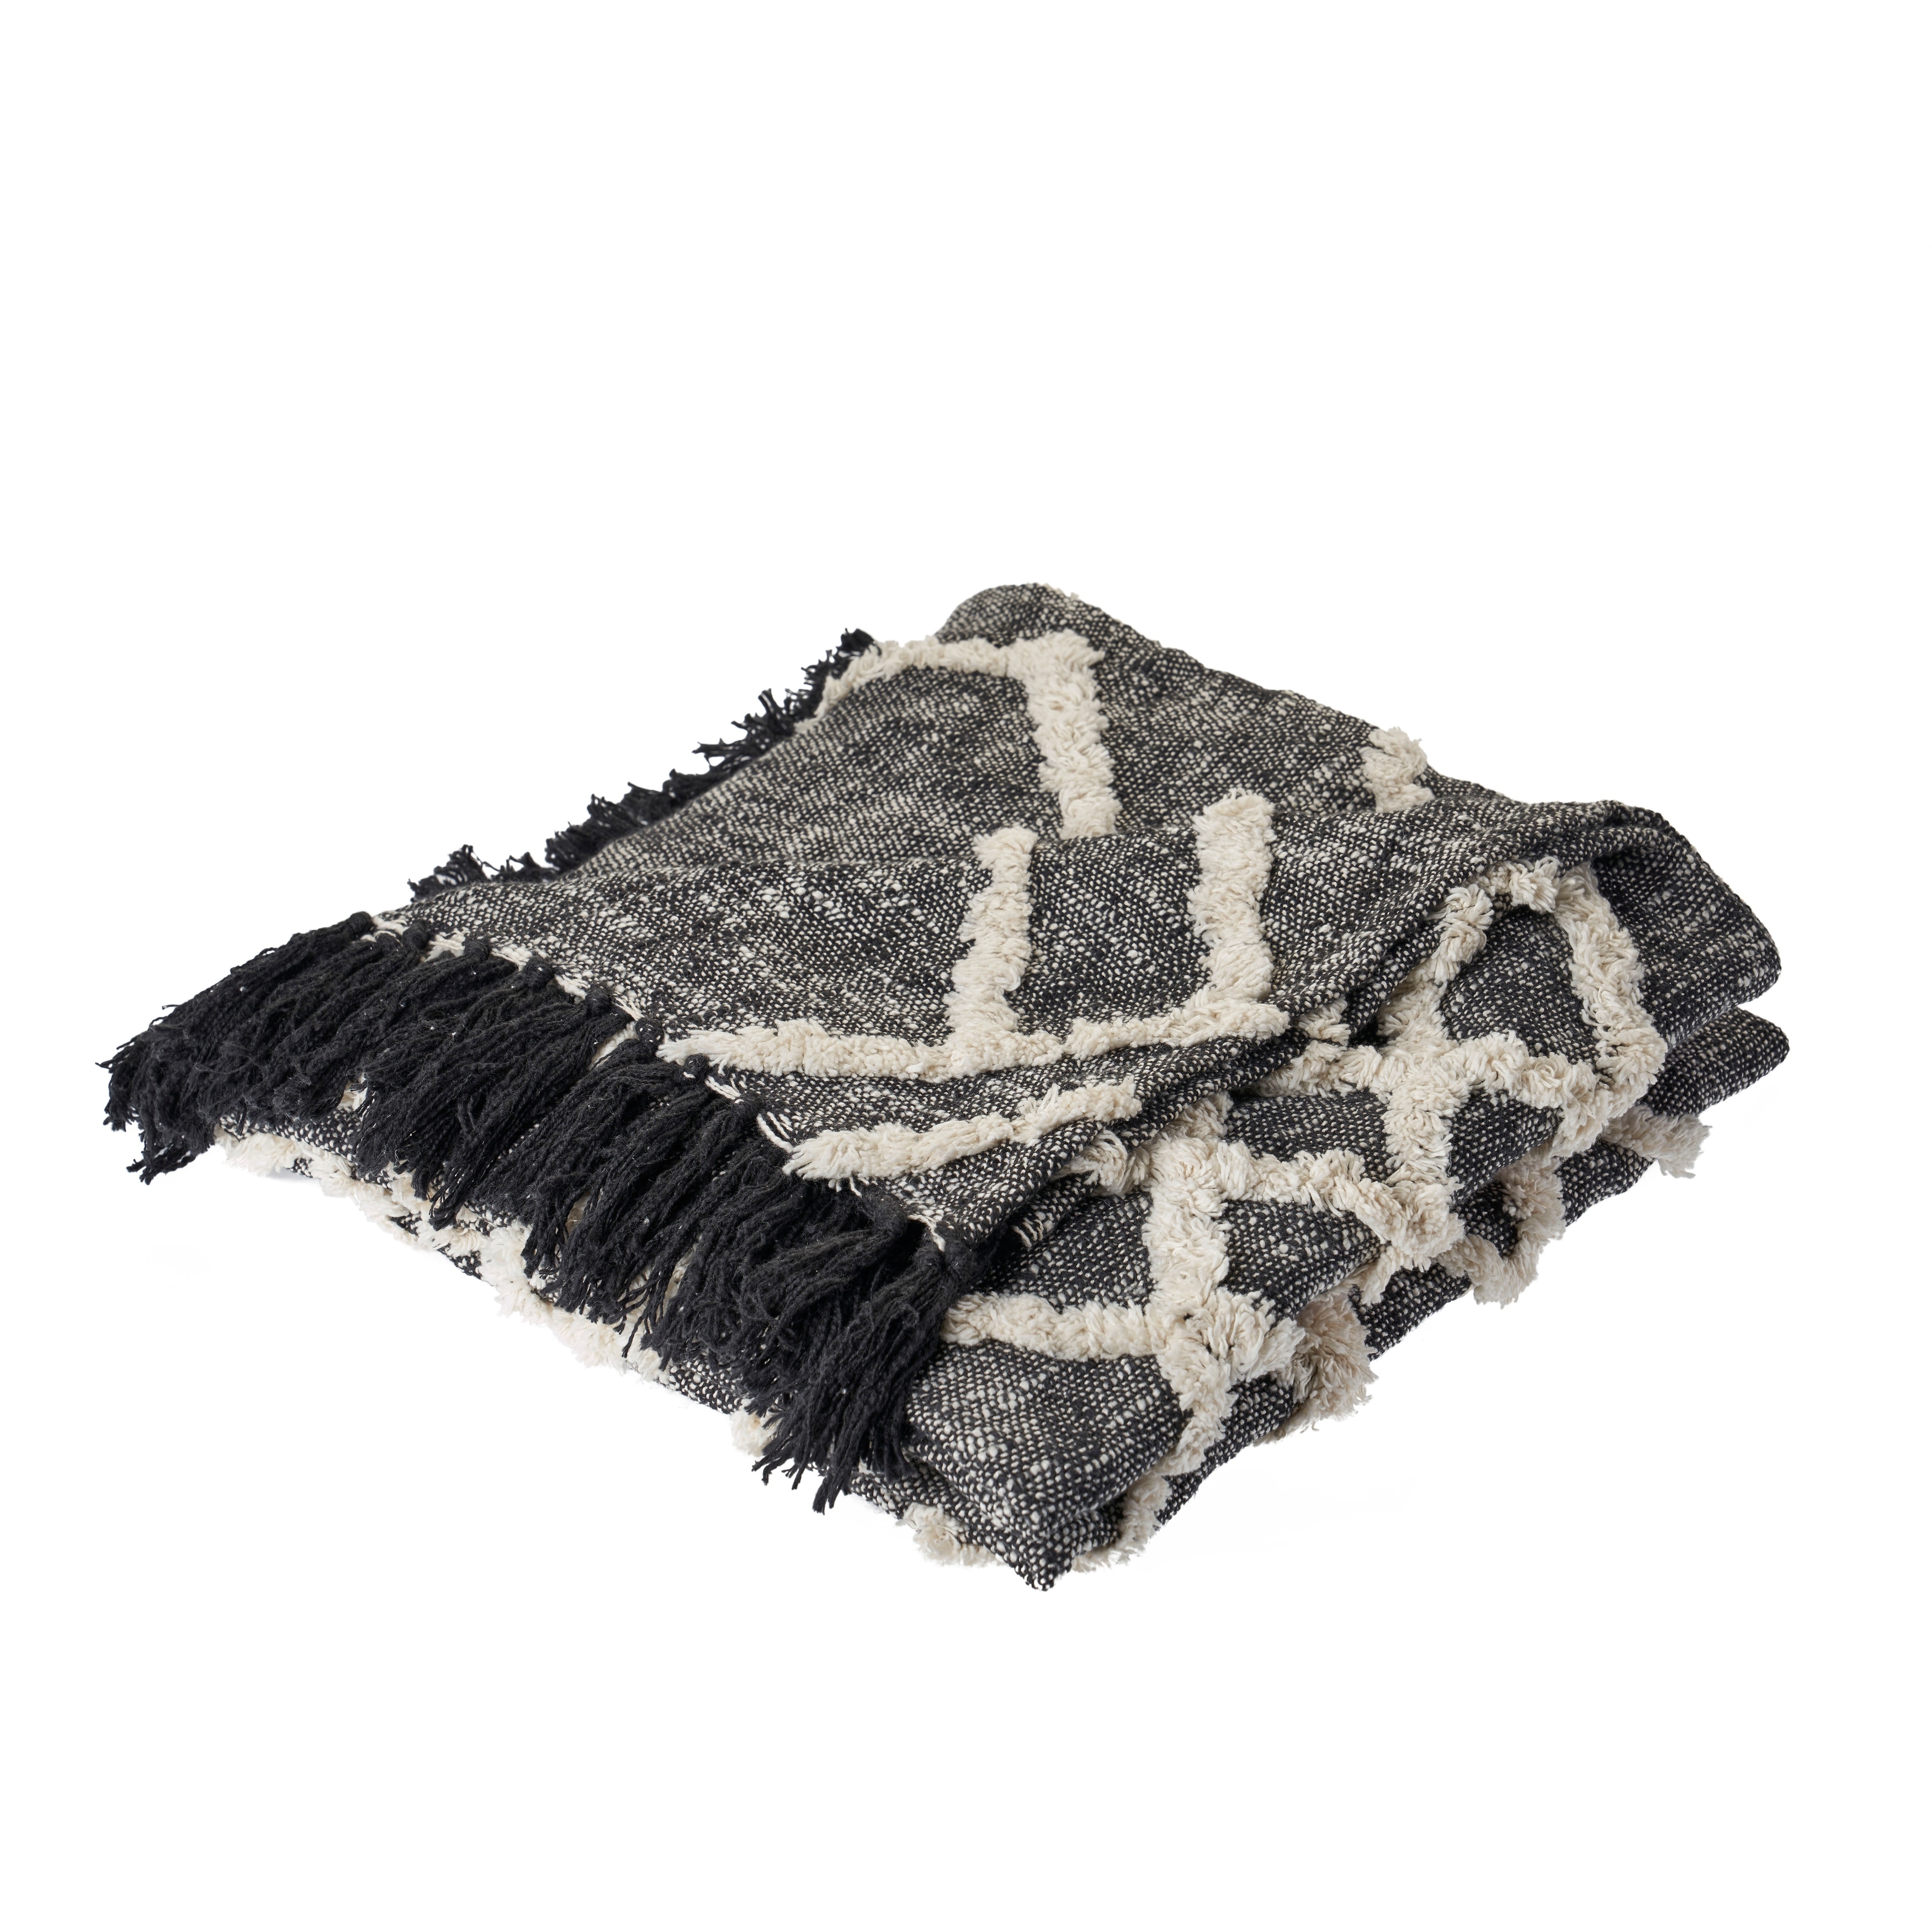 Overtufted Geometric Black And White Throw Blanket On Sale Overstock 31595667